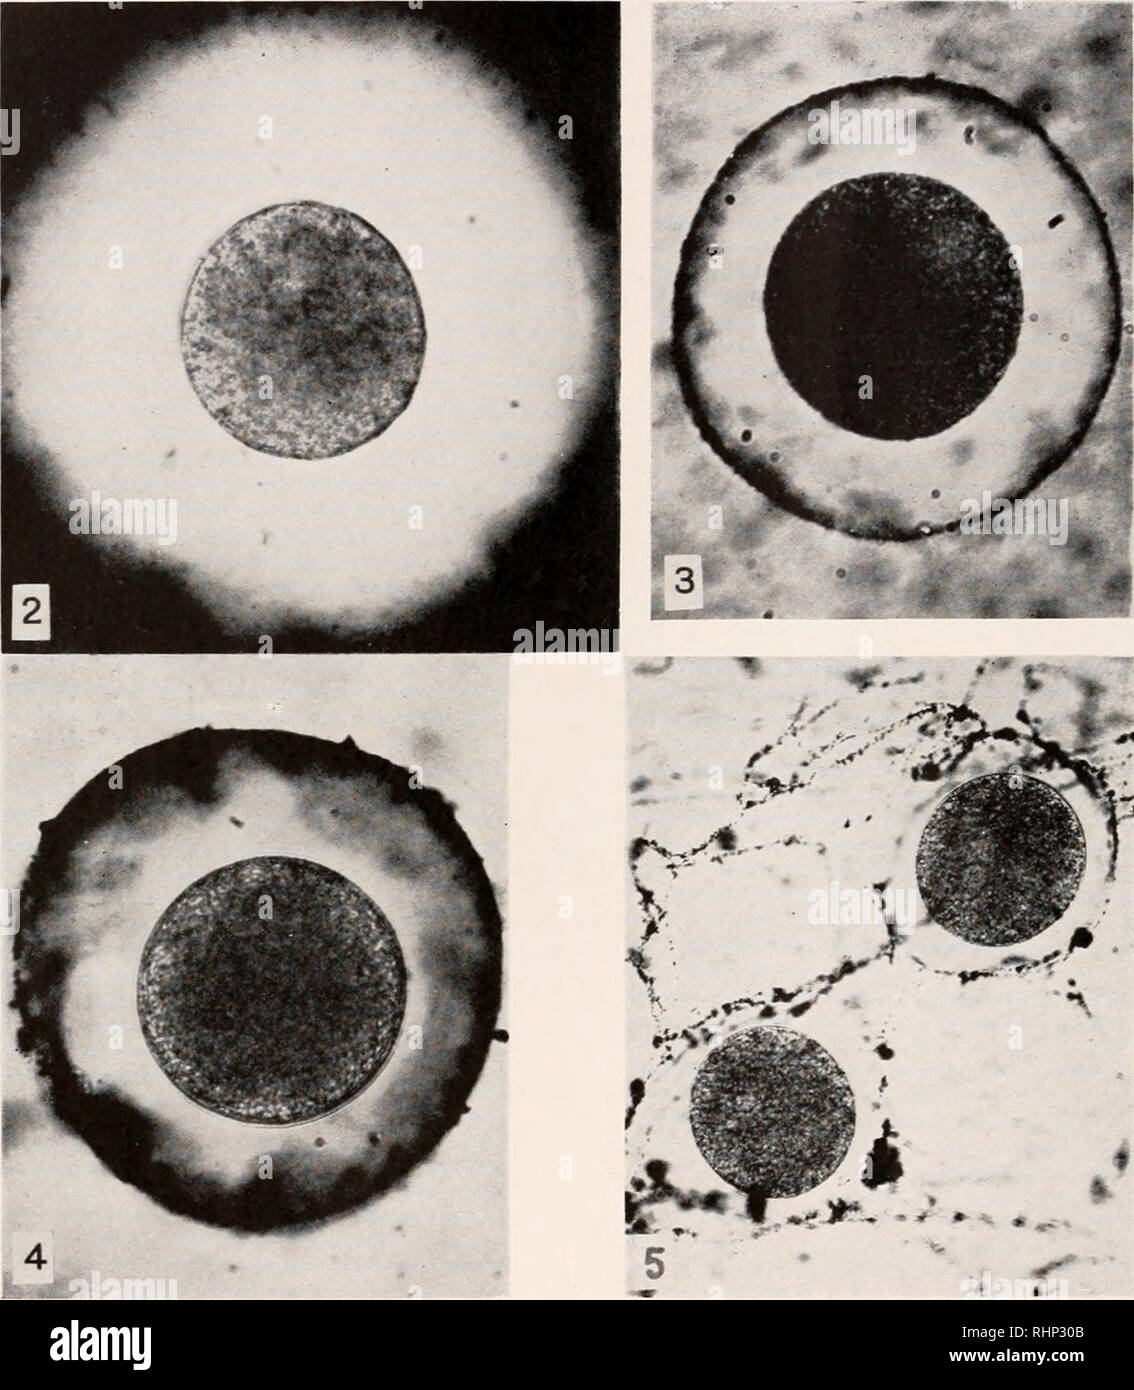 . The Biological bulletin. Biology; Zoology; Biology; Marine Biology. 192 JOHN A. FRANK. t PLATE I Microscopic appearance of the egg-agglutination reaction. All eggs photo- graphed in Chinese ink. FIG. 2. Normal .-irbacia egg in heated sea water surrounded by a wide zone of clear, colorless jelly. X 430. FIG. 3. A similar egg after five minutes exposure to a 5 per cent sperm extract. Note that a distinct agglutination membrane has appeared at the periphery of the jelly. X 430. FIG. 4. A similar egg after thirty minutes exposure to a 5 per cent sperm extract. The agglutination membrane has beco Stock Photo